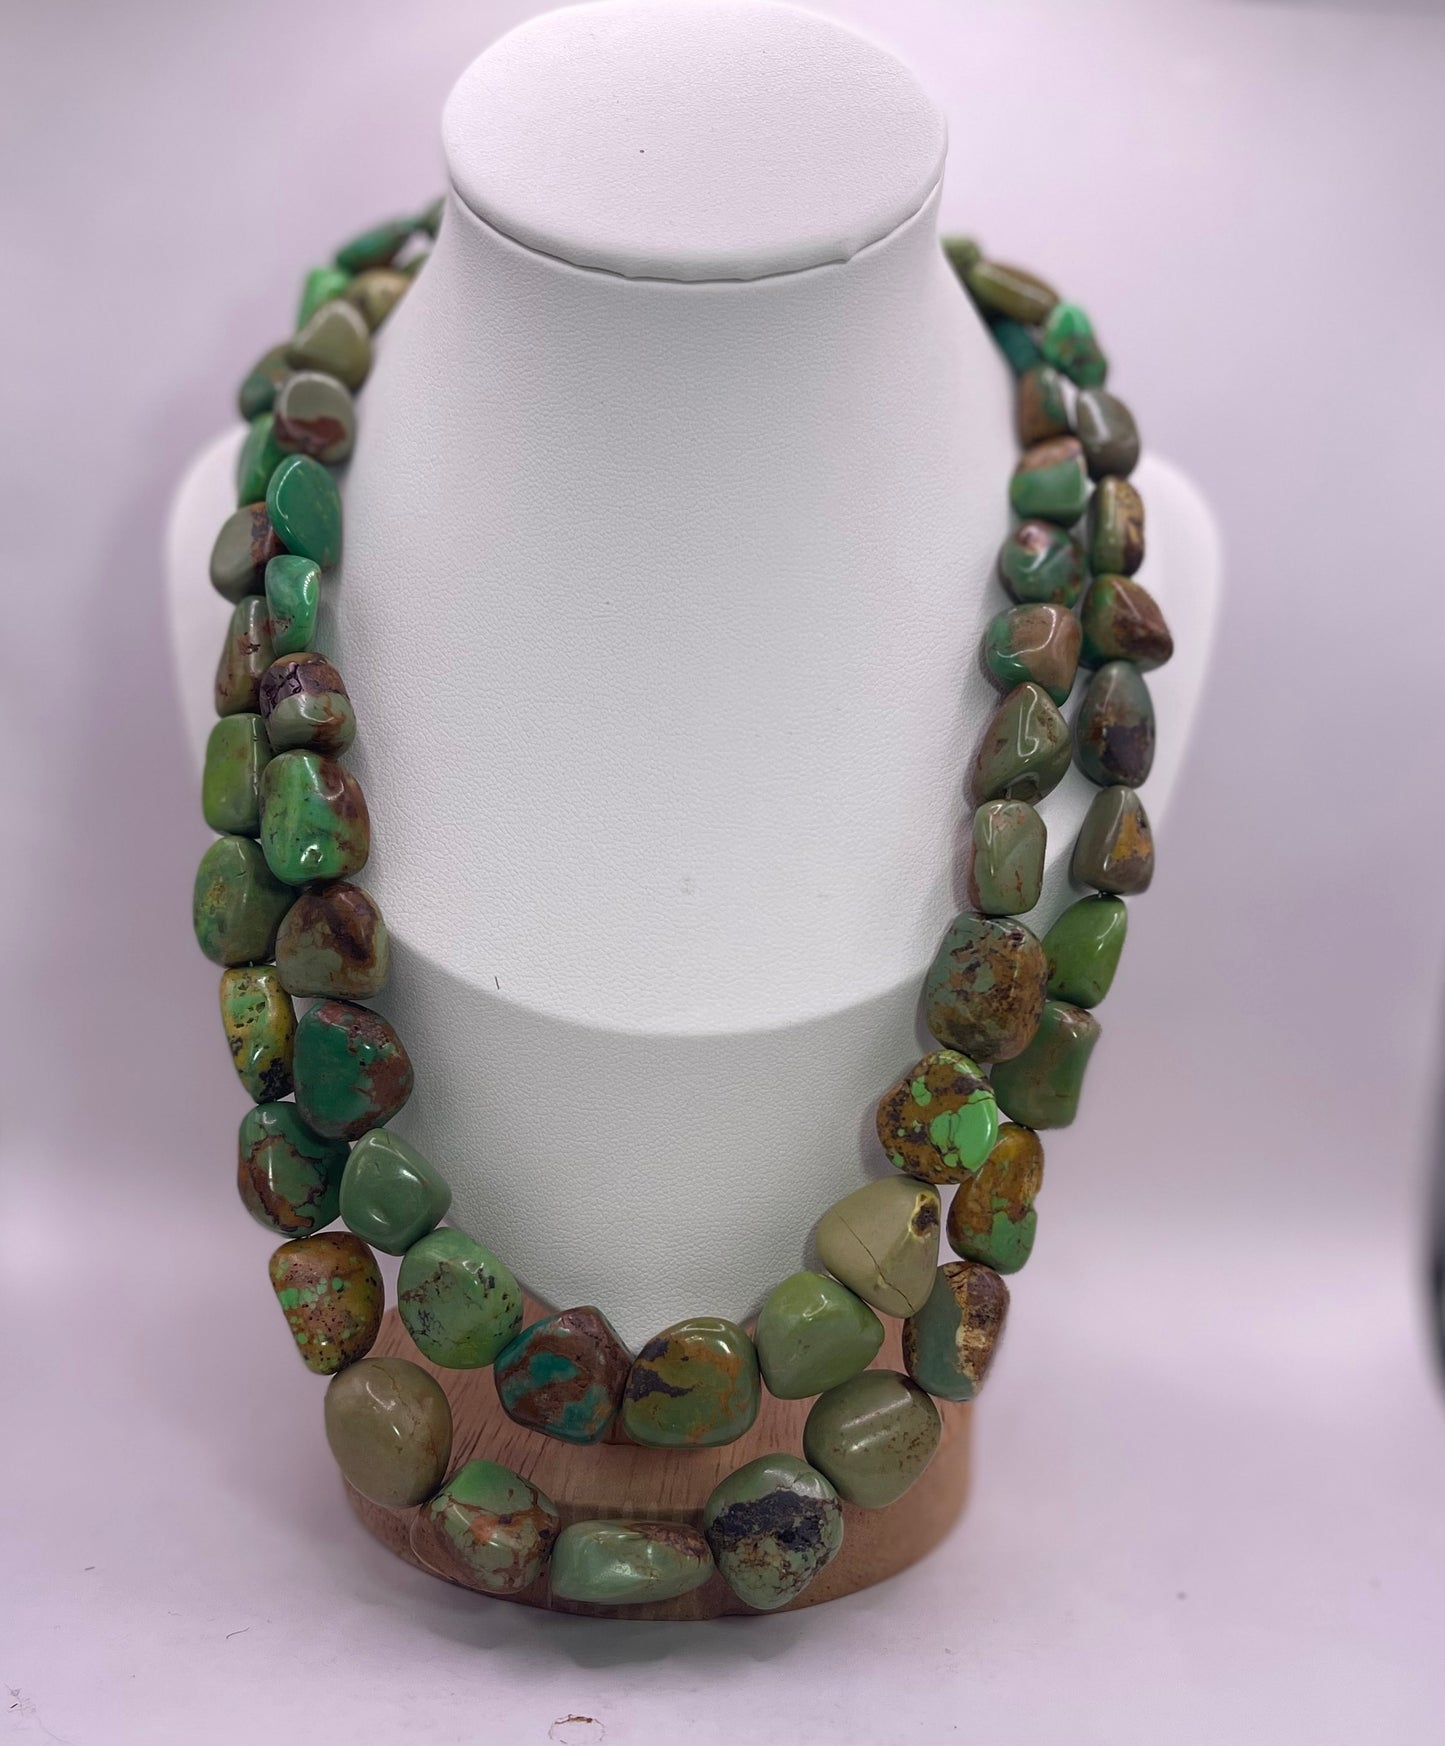 Mojave green turquoise nugget necklace